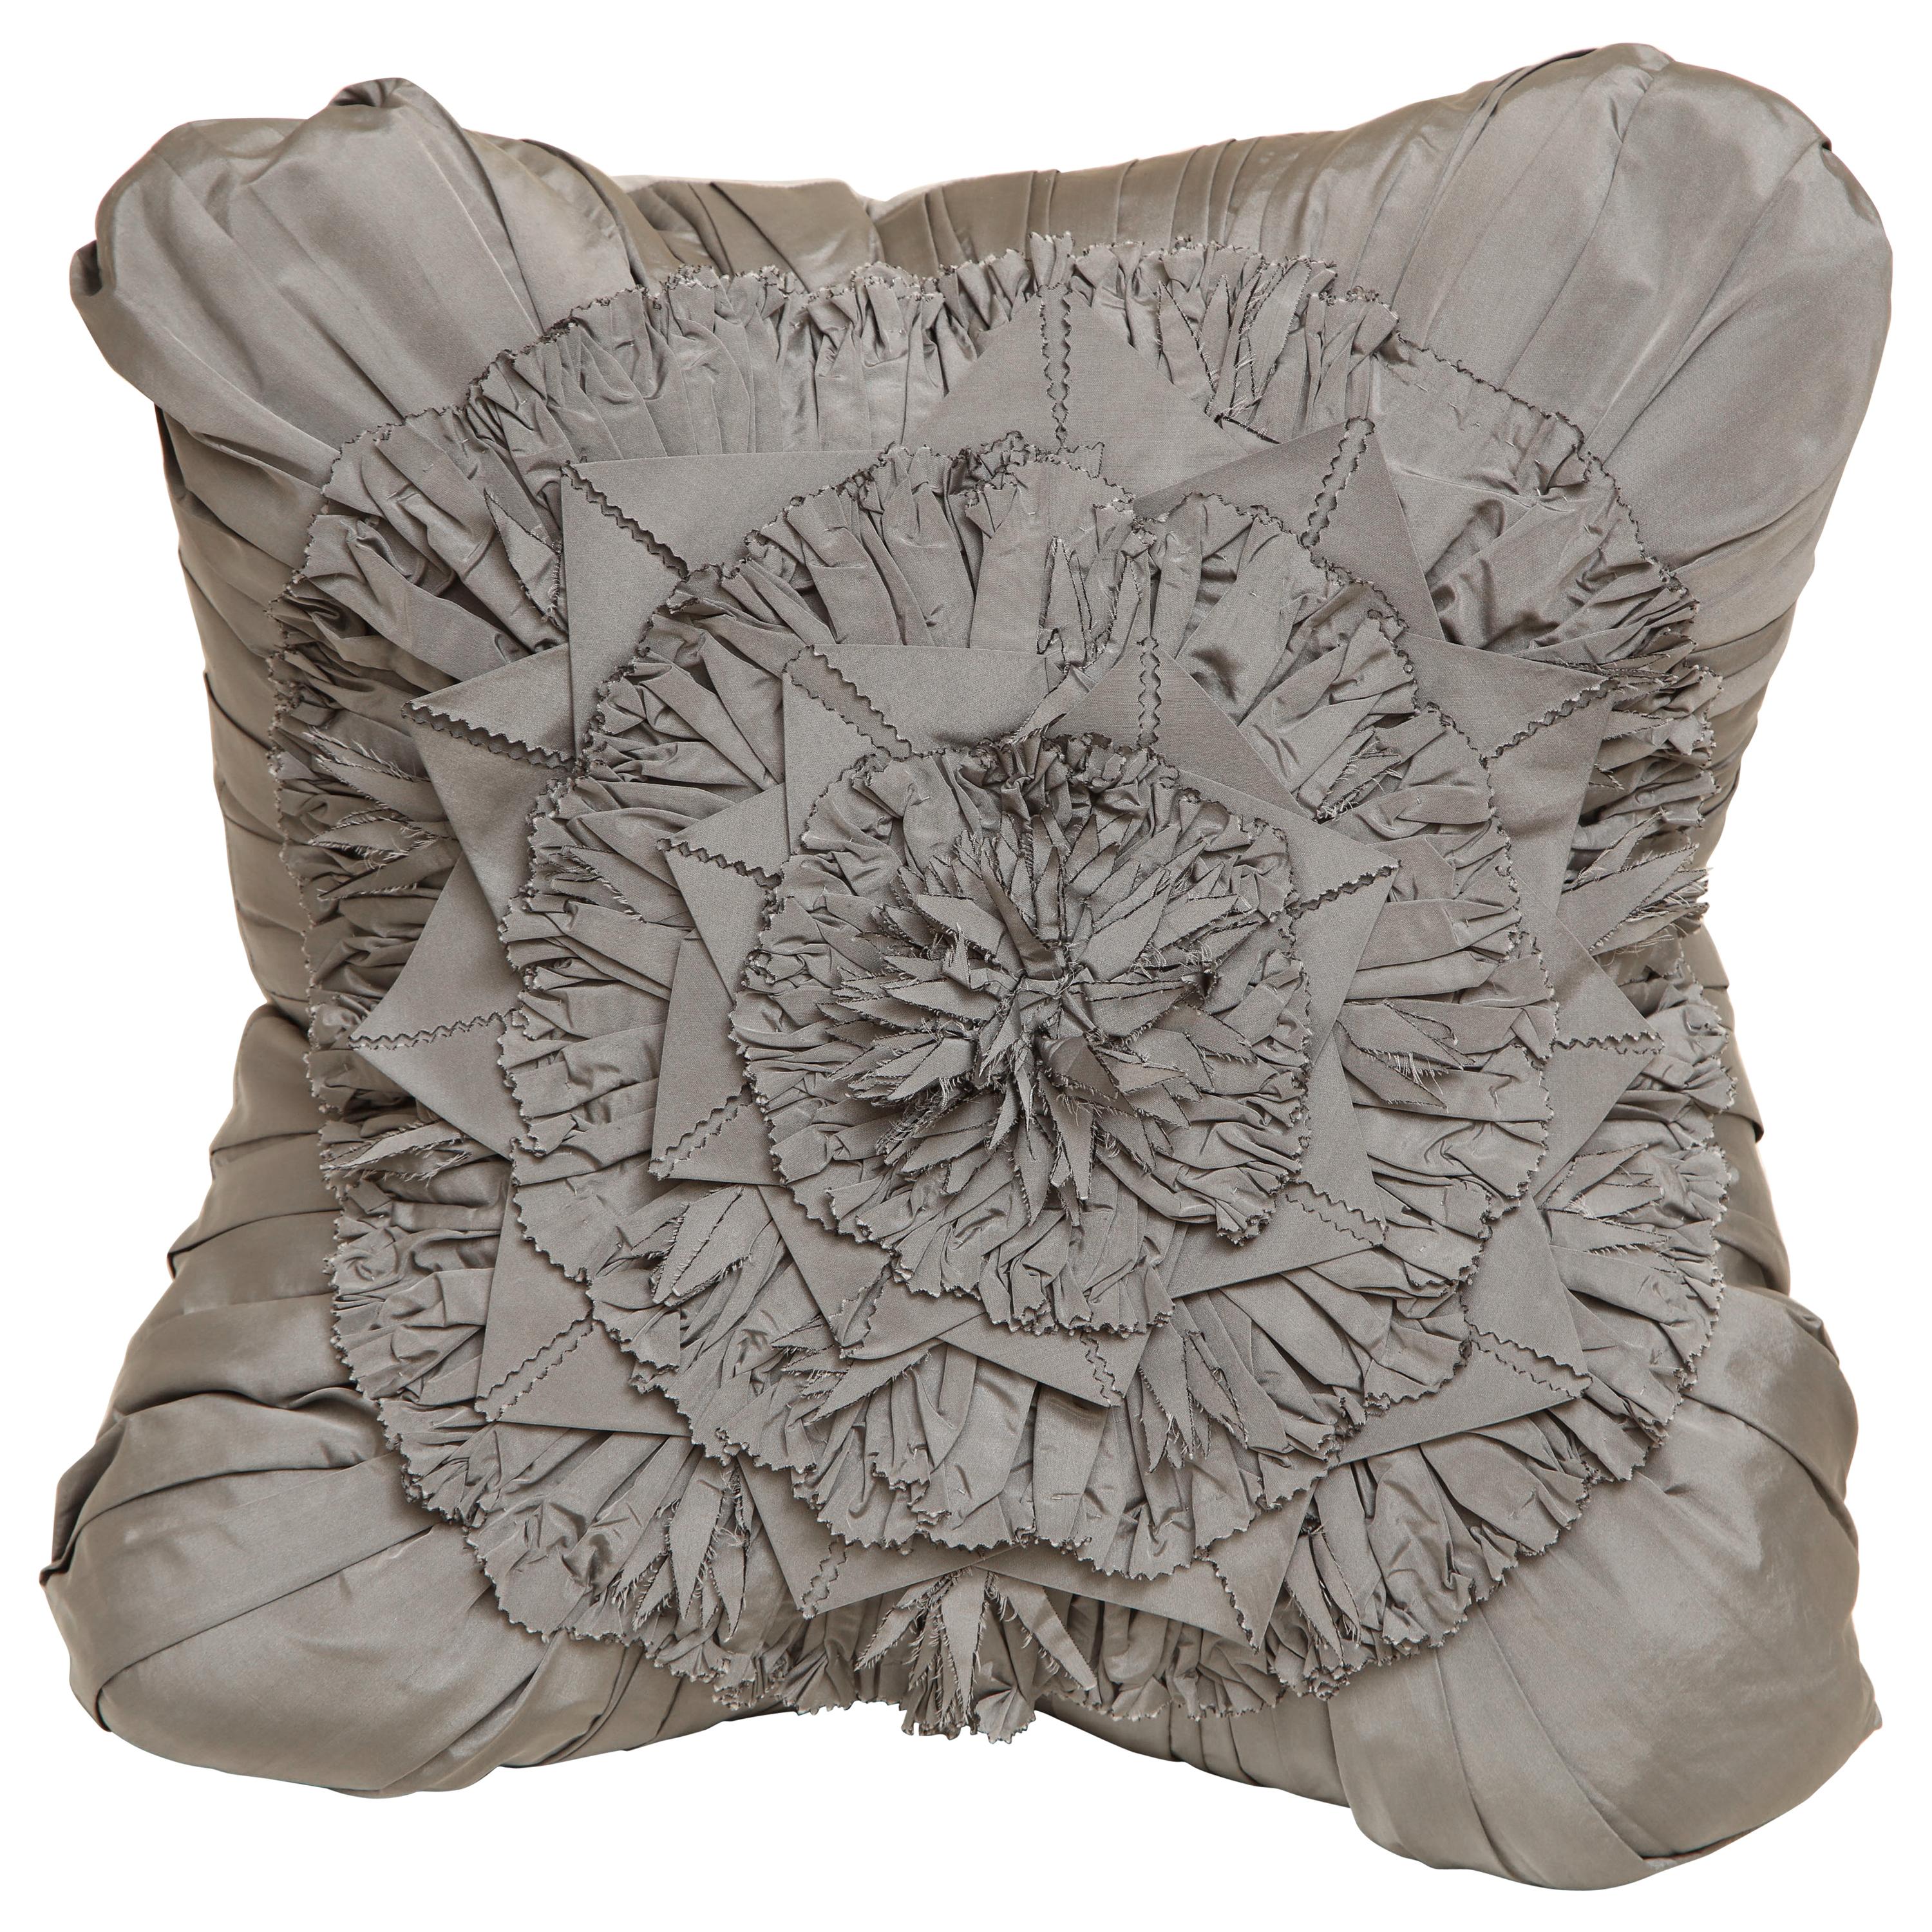 Lili Piazza Large Modern Gray Distressed Floral Pillow For Sale